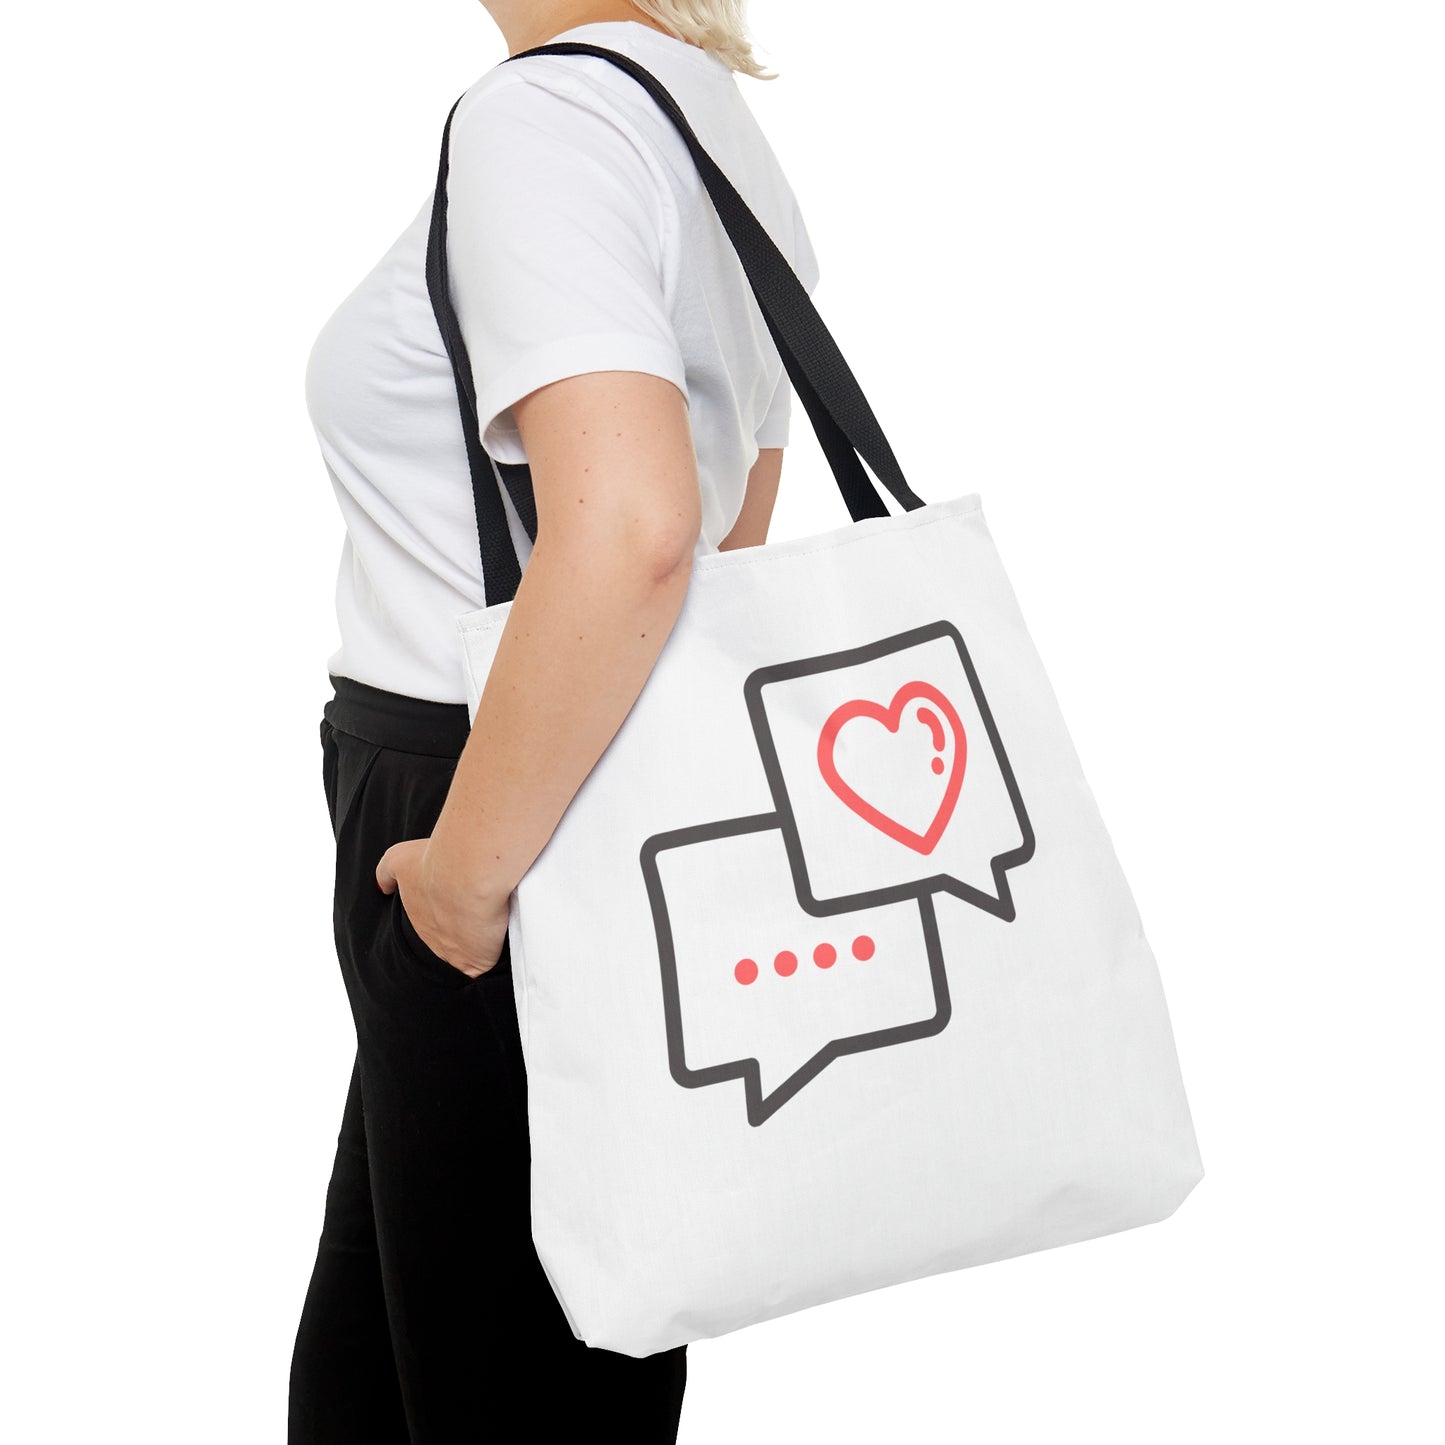 Messege from Heart Printed Tote Bag, Valentine's Tote Bag